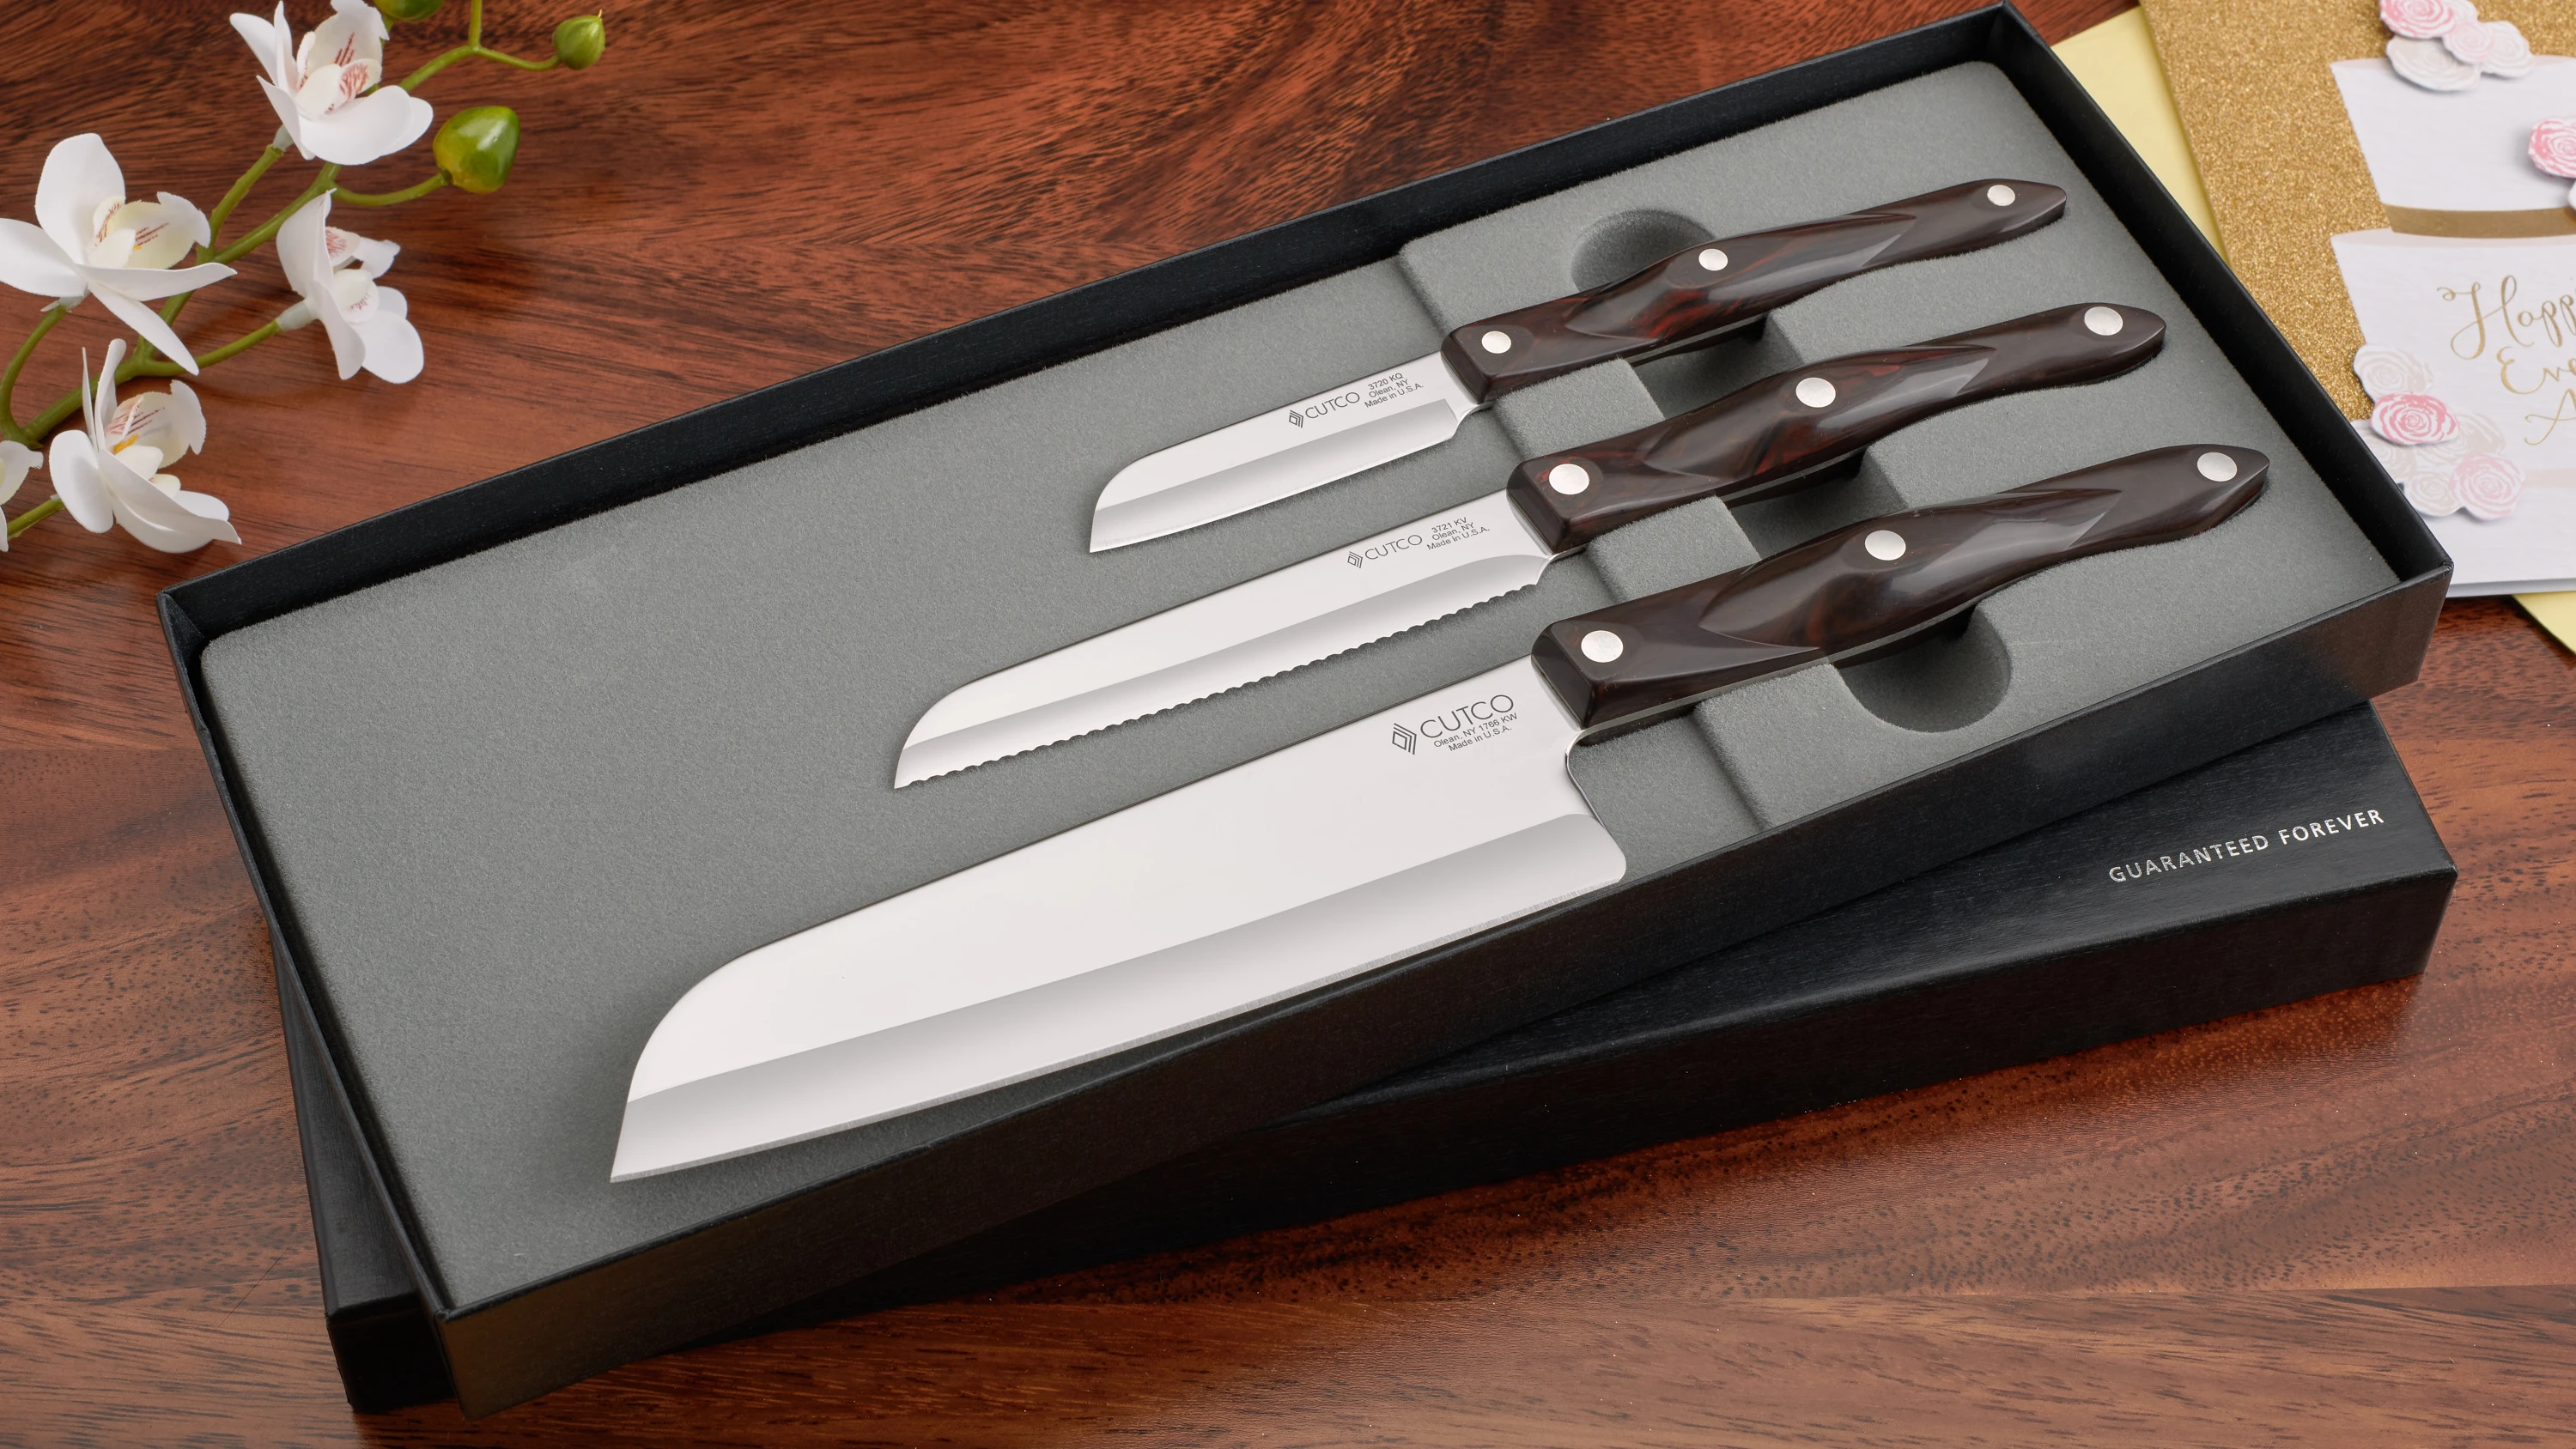 All Knife Set with Tray, 8 Pieces, Knife Sets by Cutco